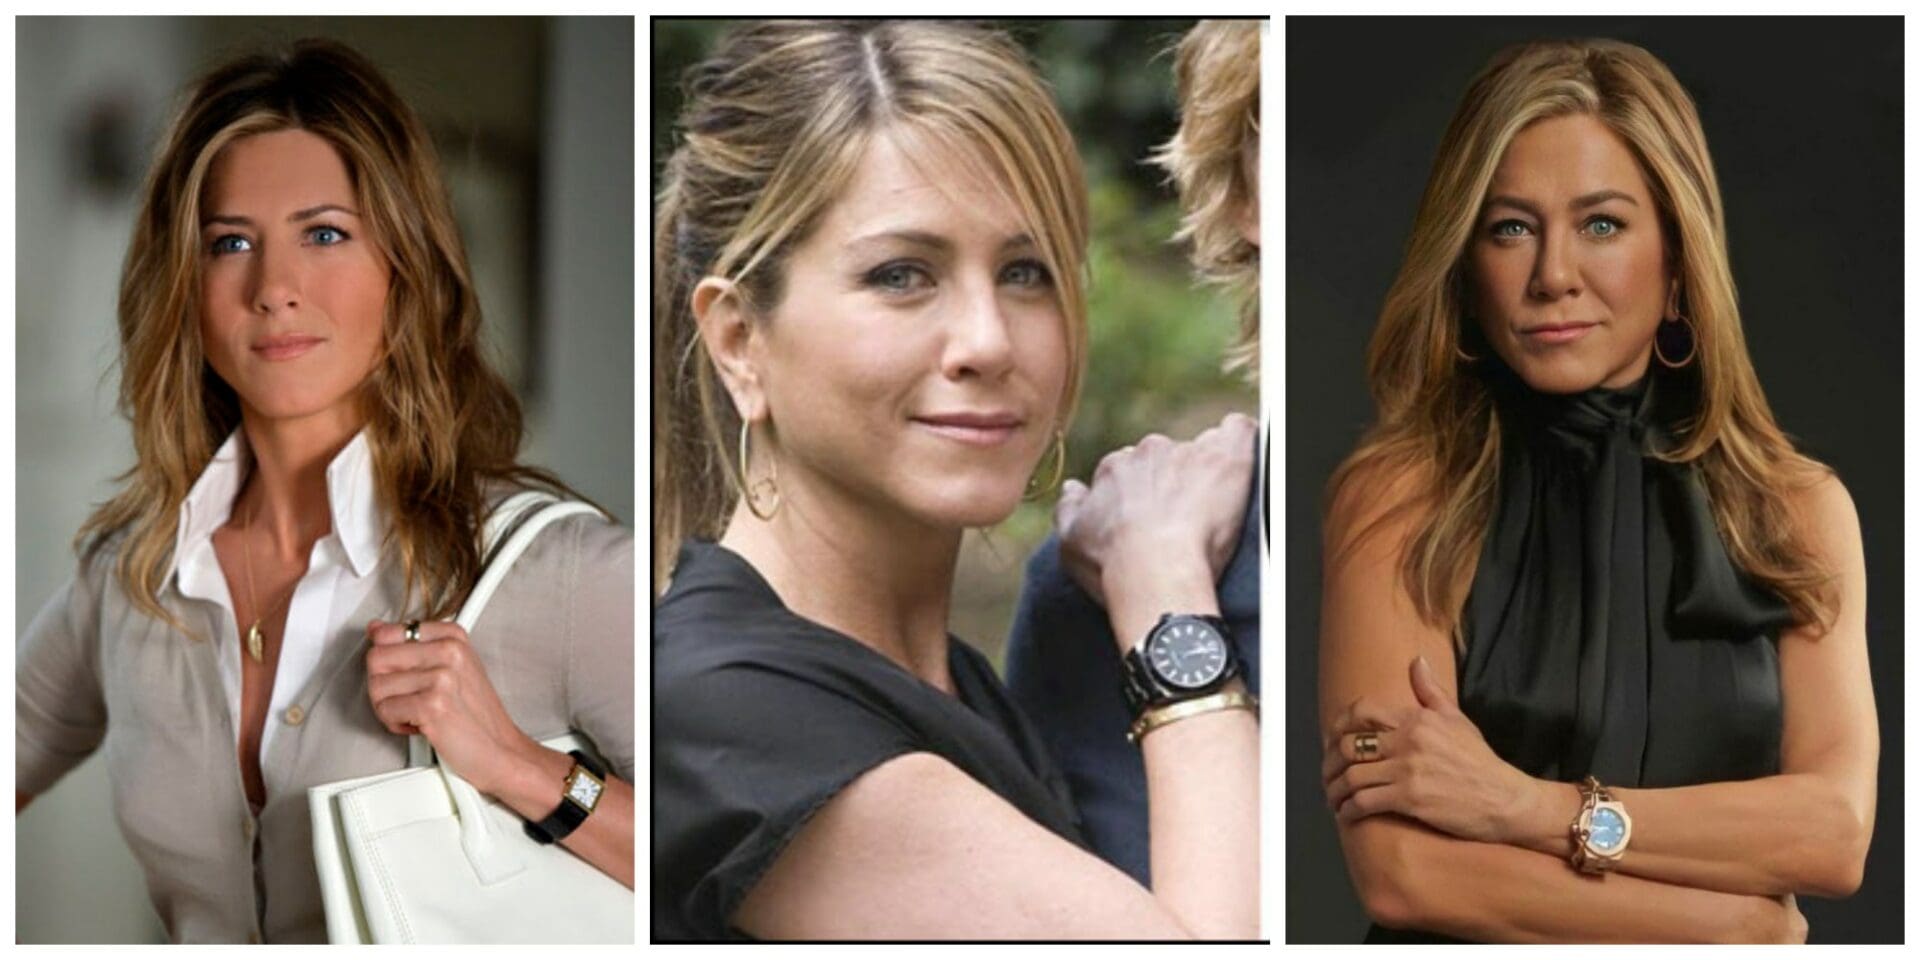 Jennifer Aniston has a far better watch collection than you do